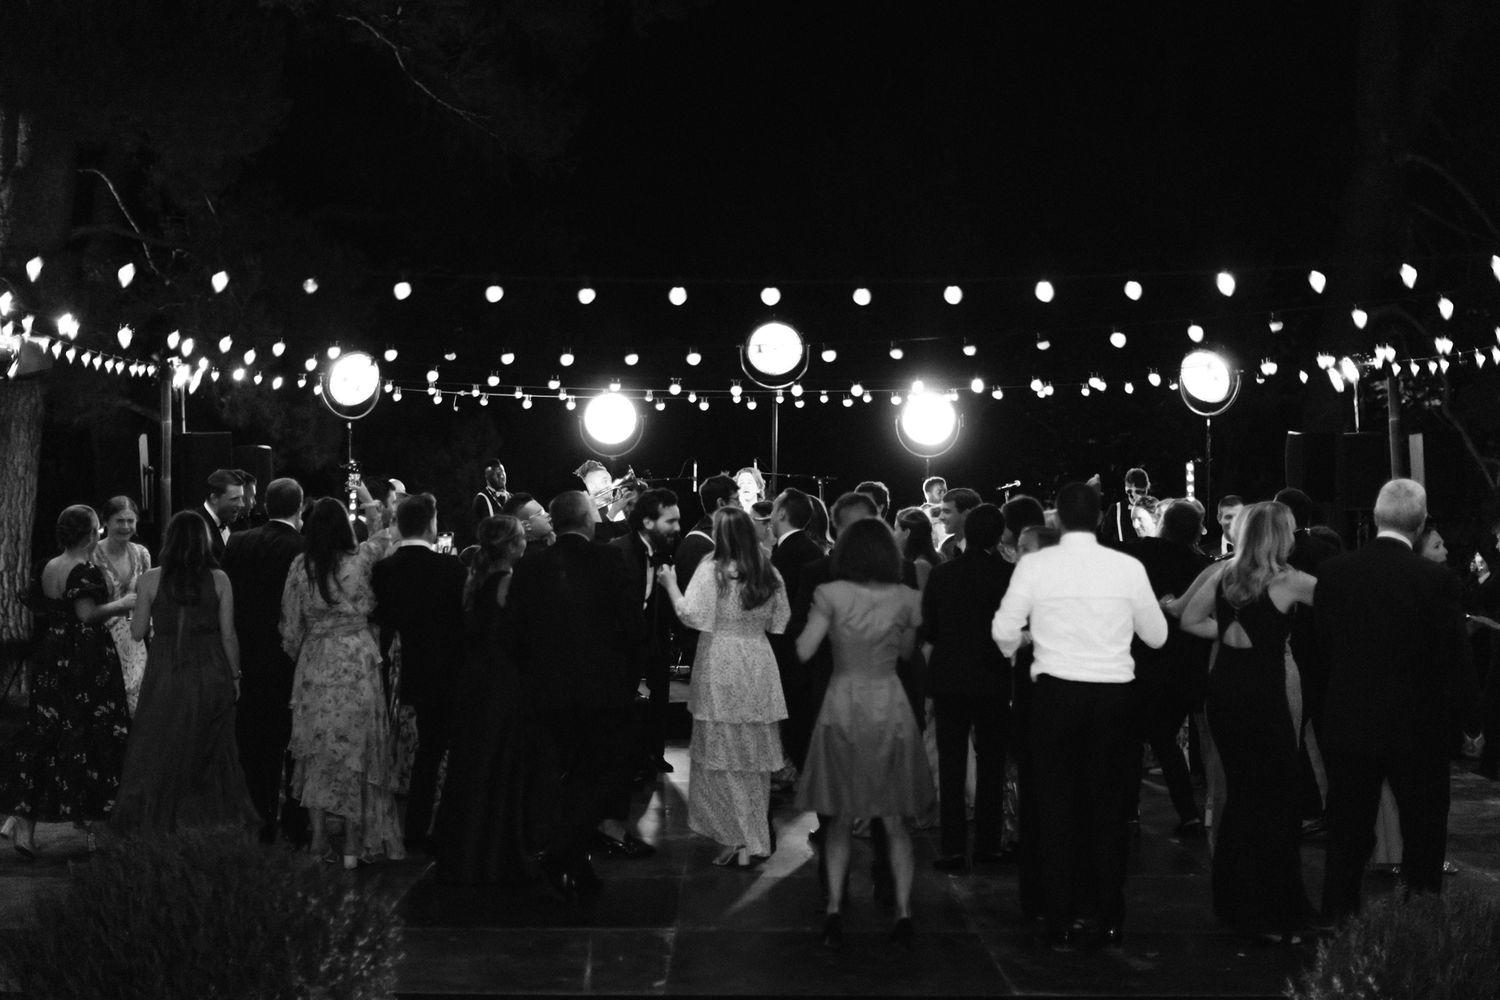 guests dancing during wedding reception under outdoor string lights